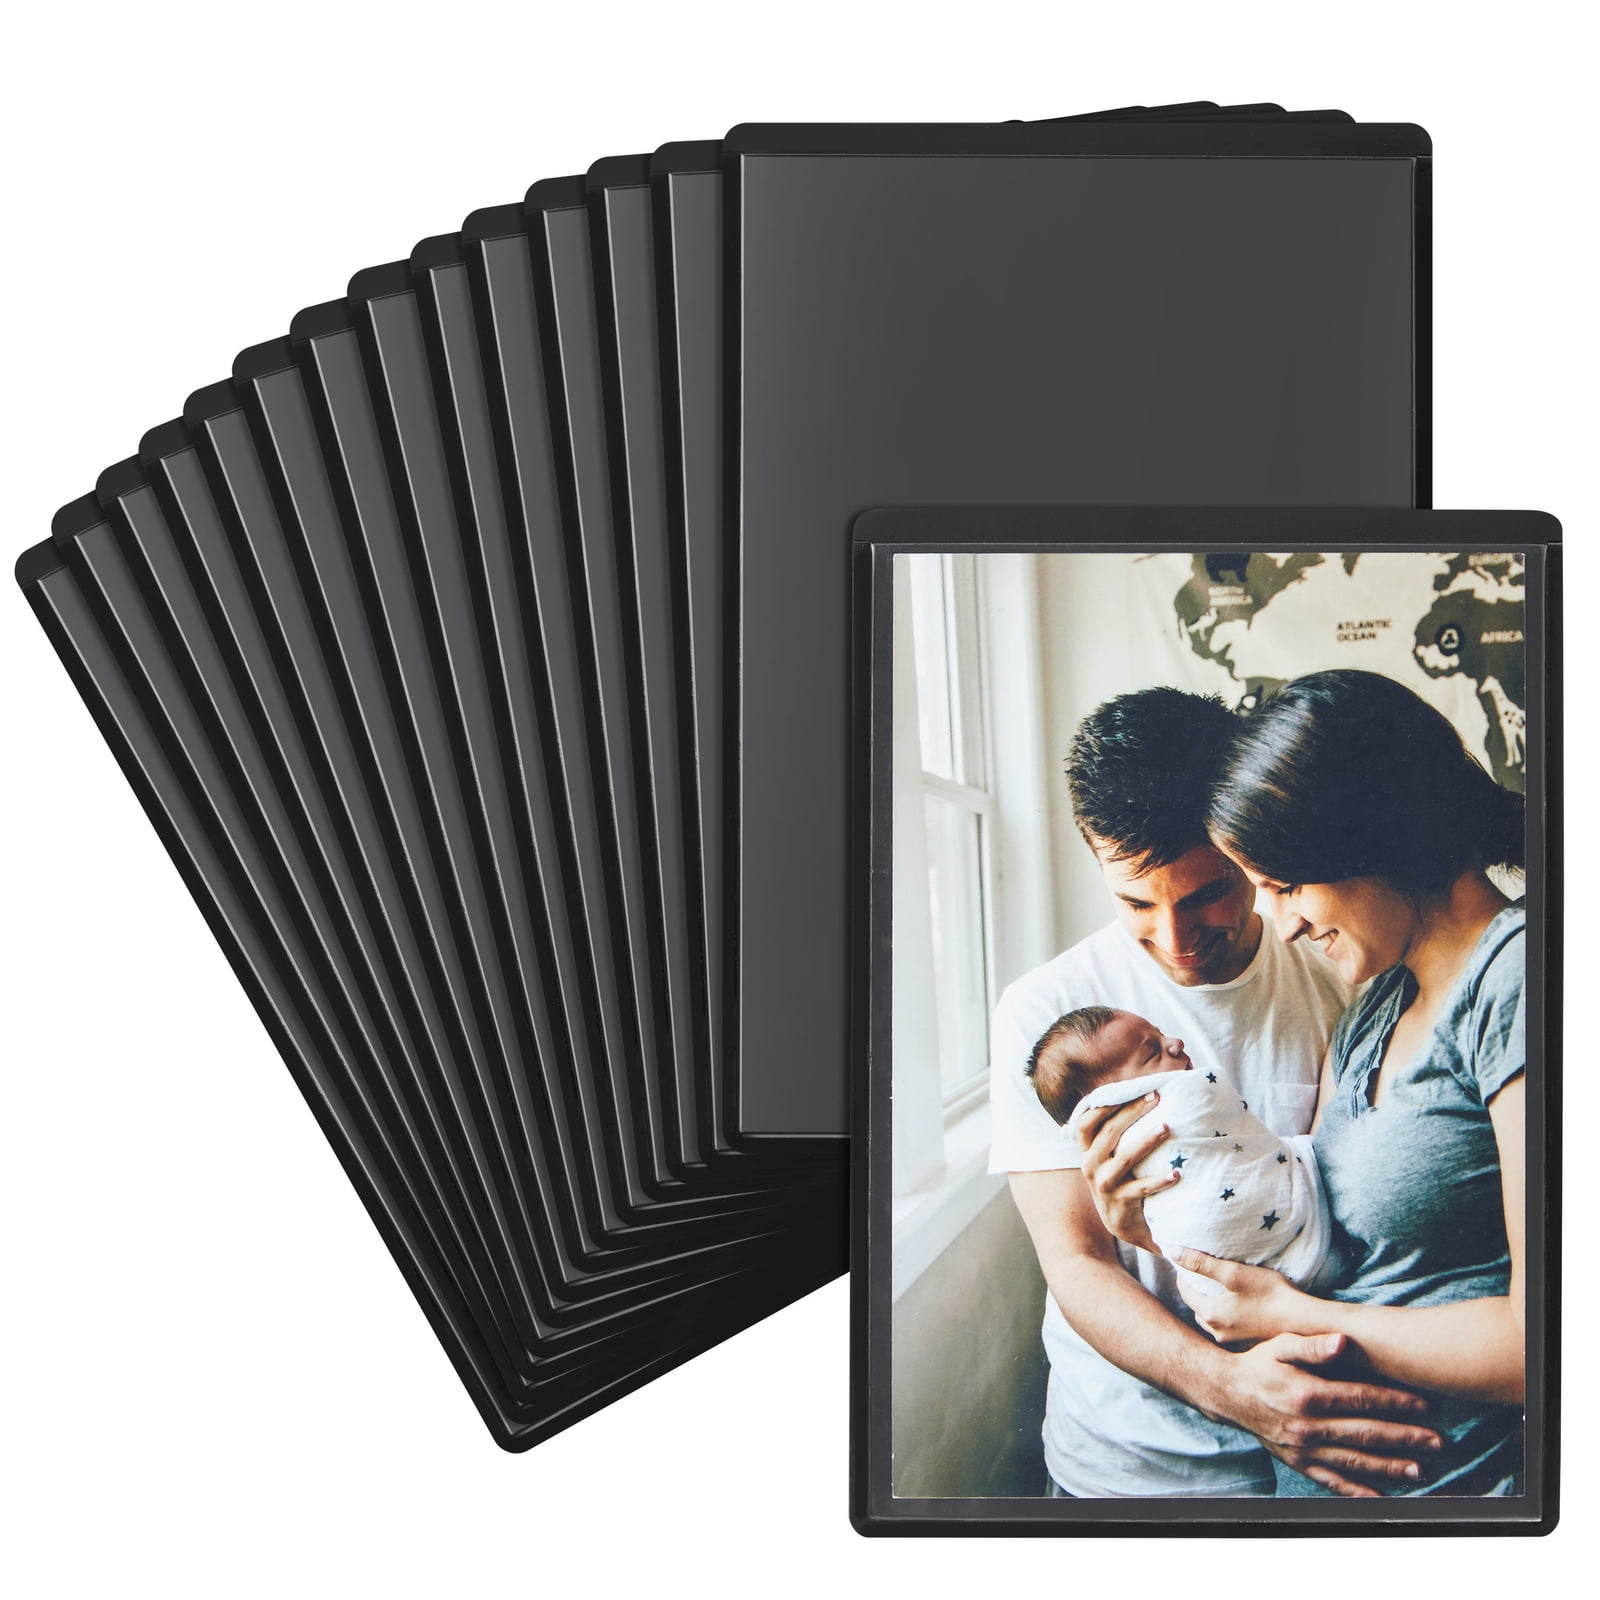 One 8x10, Two 5x7, Two 4x6 inch 5 Magnetic Picture Frames Set with A Faith  Decal, Black Photo Frame Display Photos for Refrigerator, Wall Decor